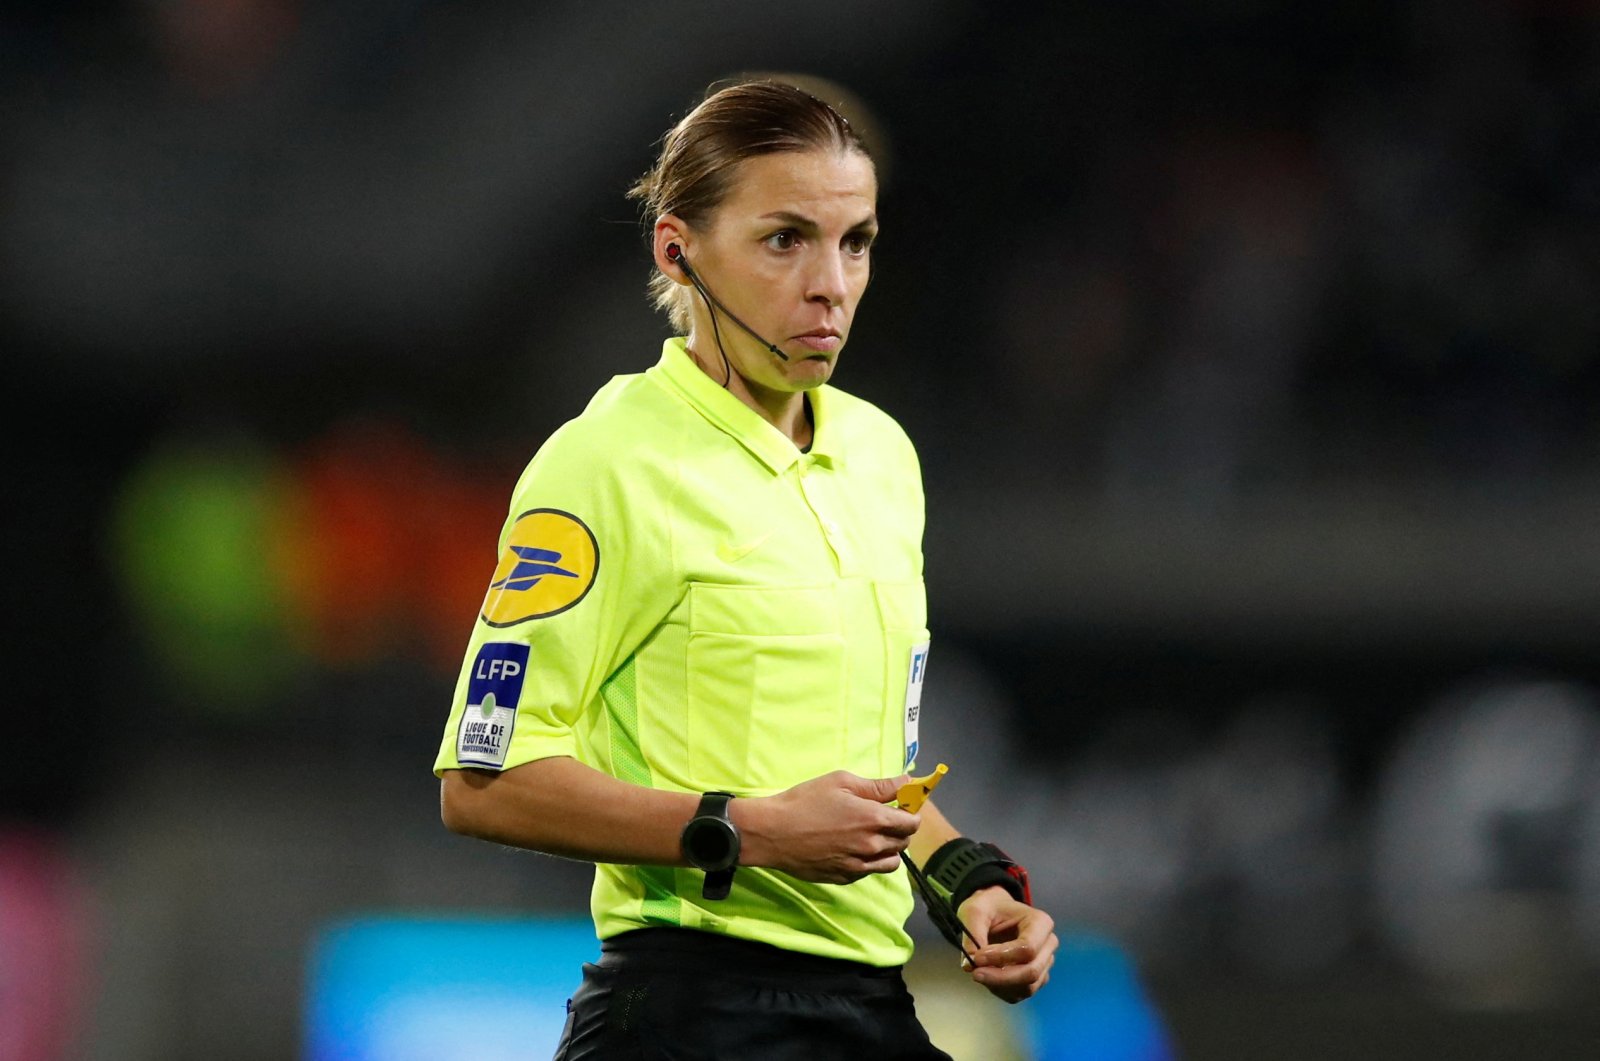 Referee Stephanie Frappart in action during a Ligue 1 match, Rennes, France, Dec. 1, 2021. (Rea)